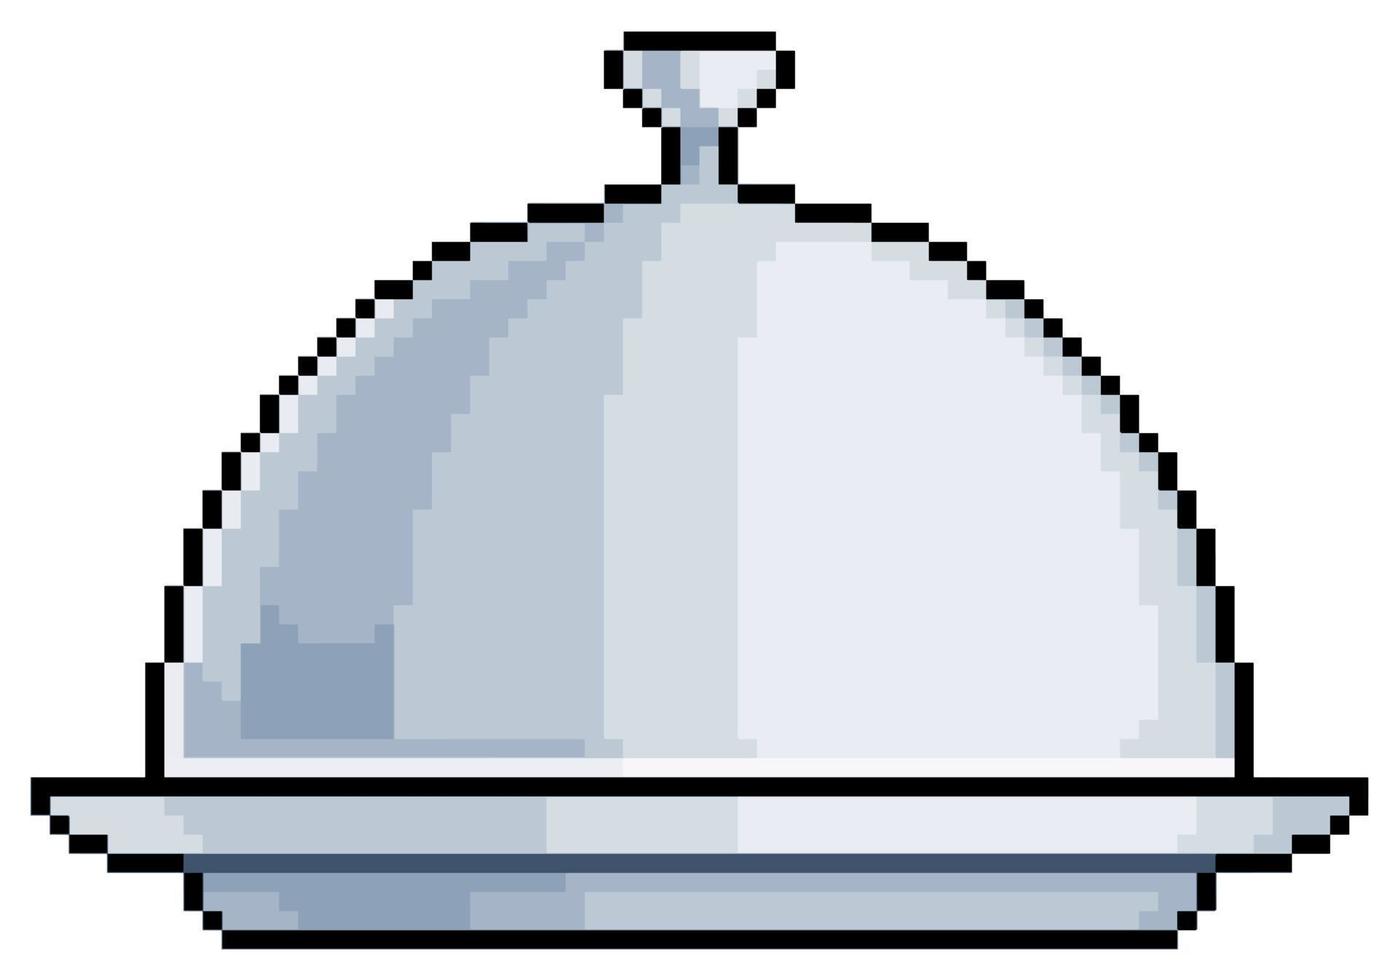 Pixel art metal food tray vector icon for 8bit game on white background